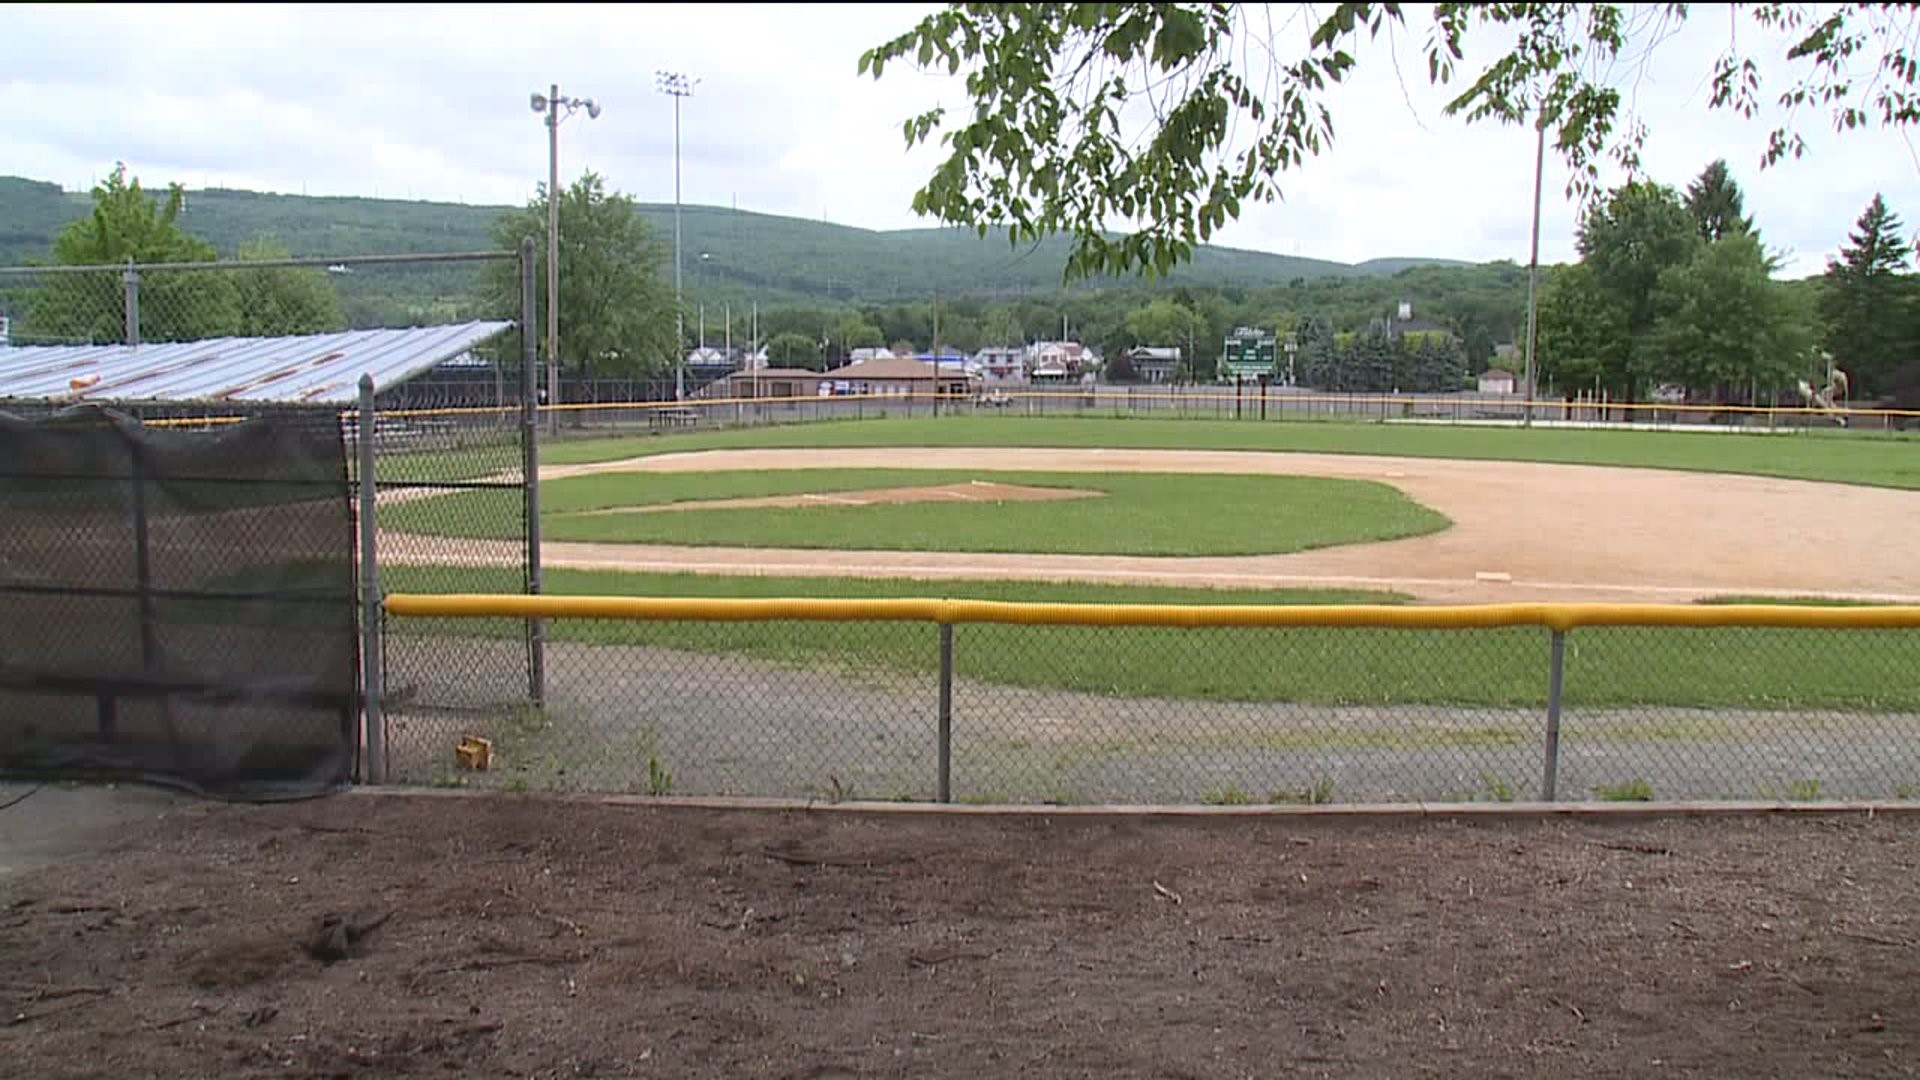 Improvements, Security Upgrades Coming to Blakely Park